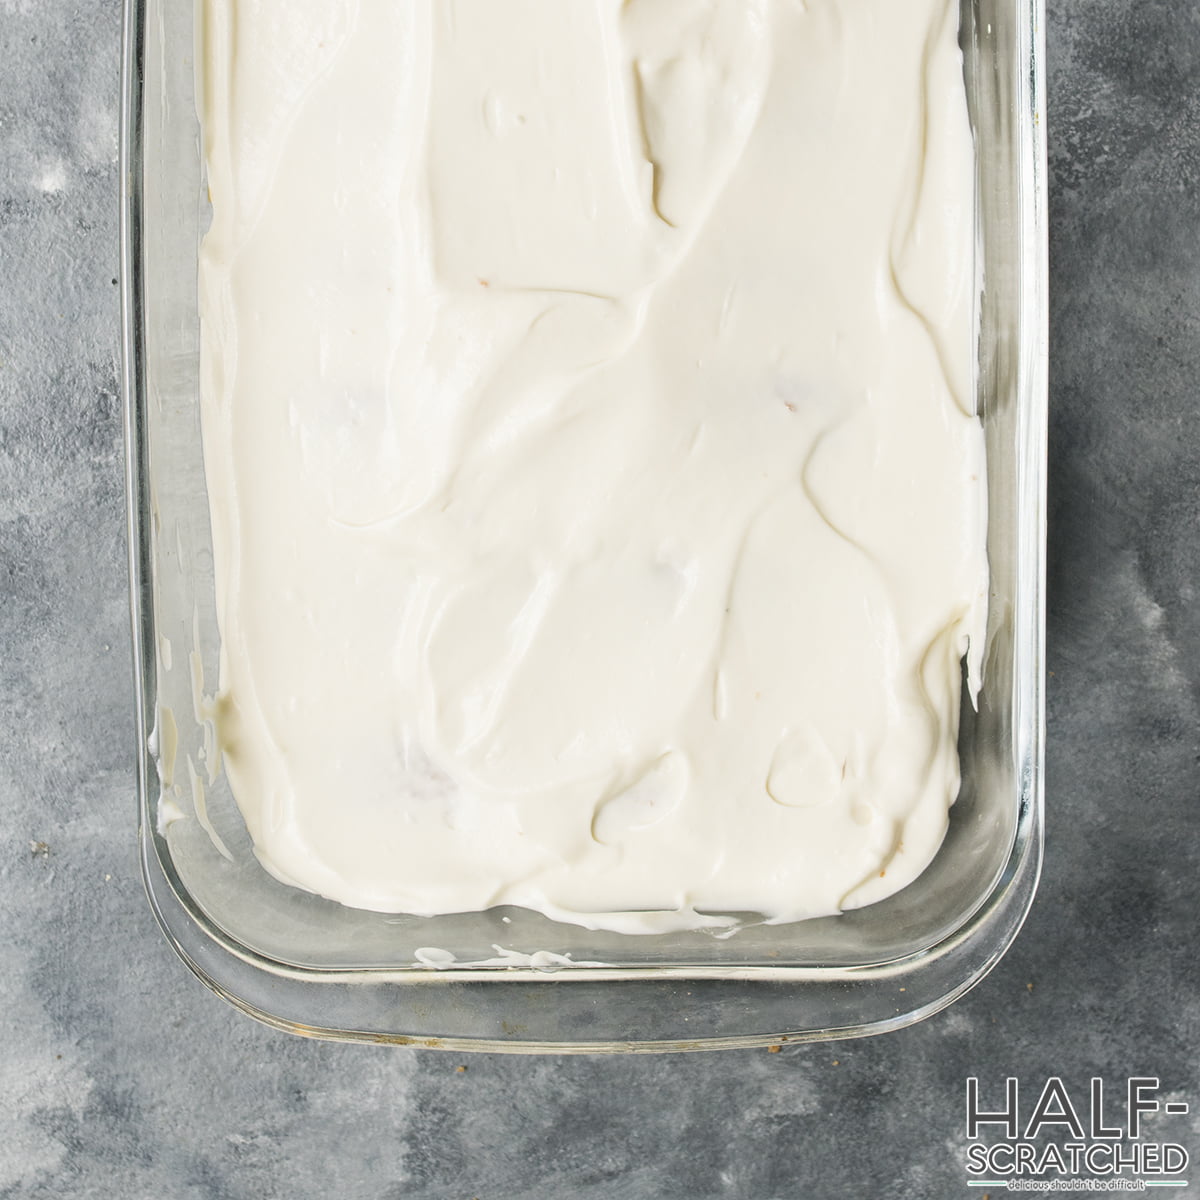 Spreading cream mixture in a baking dish